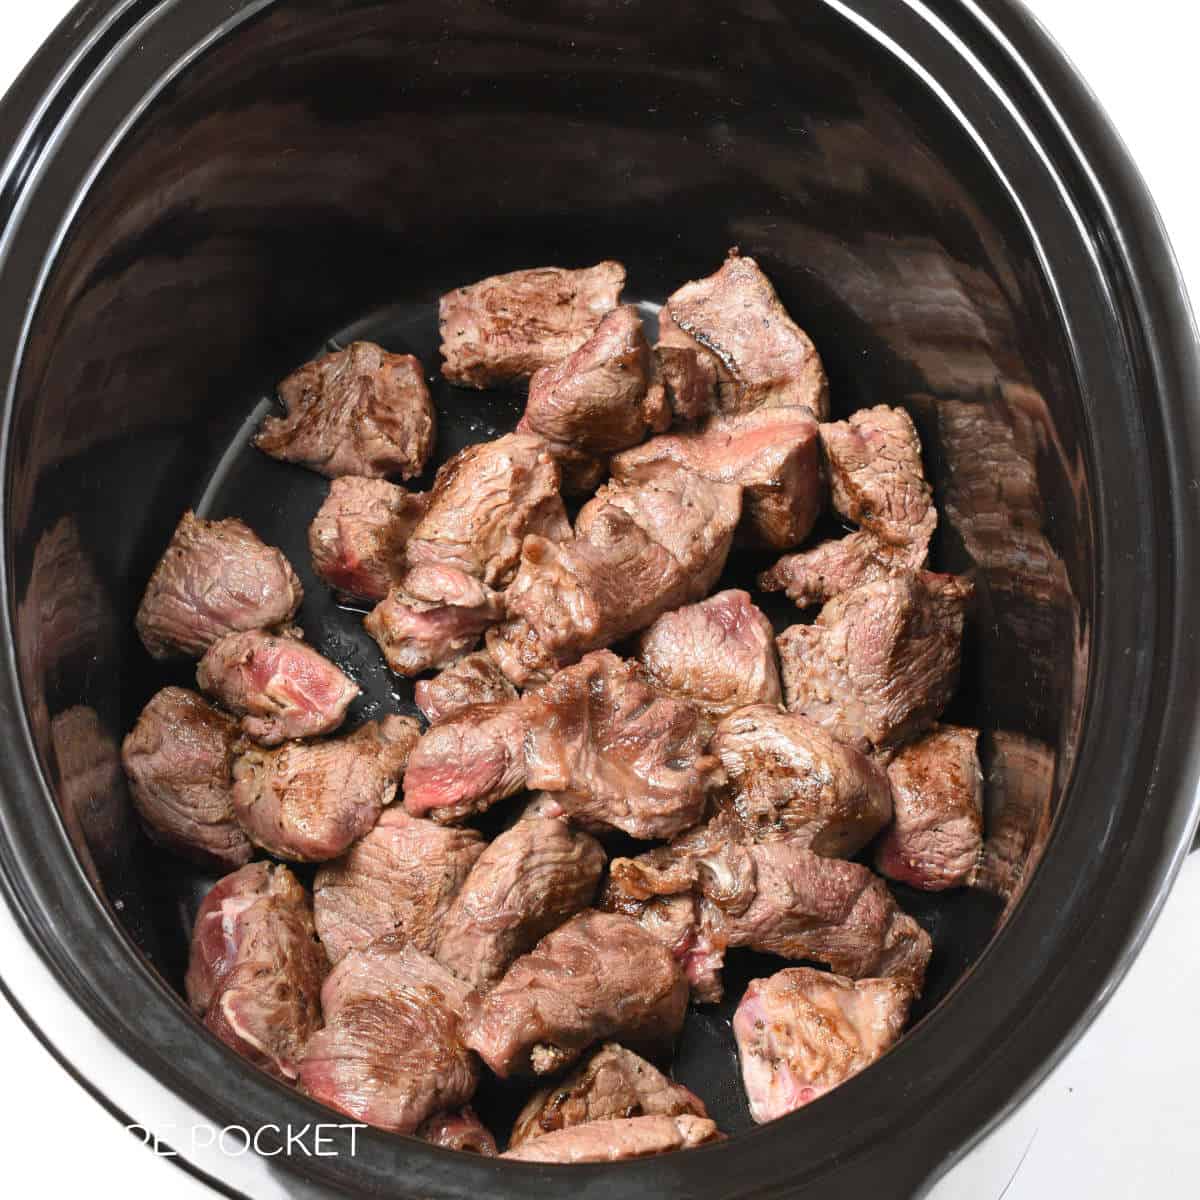 Fried meat pieces in a slow cooker bowl.